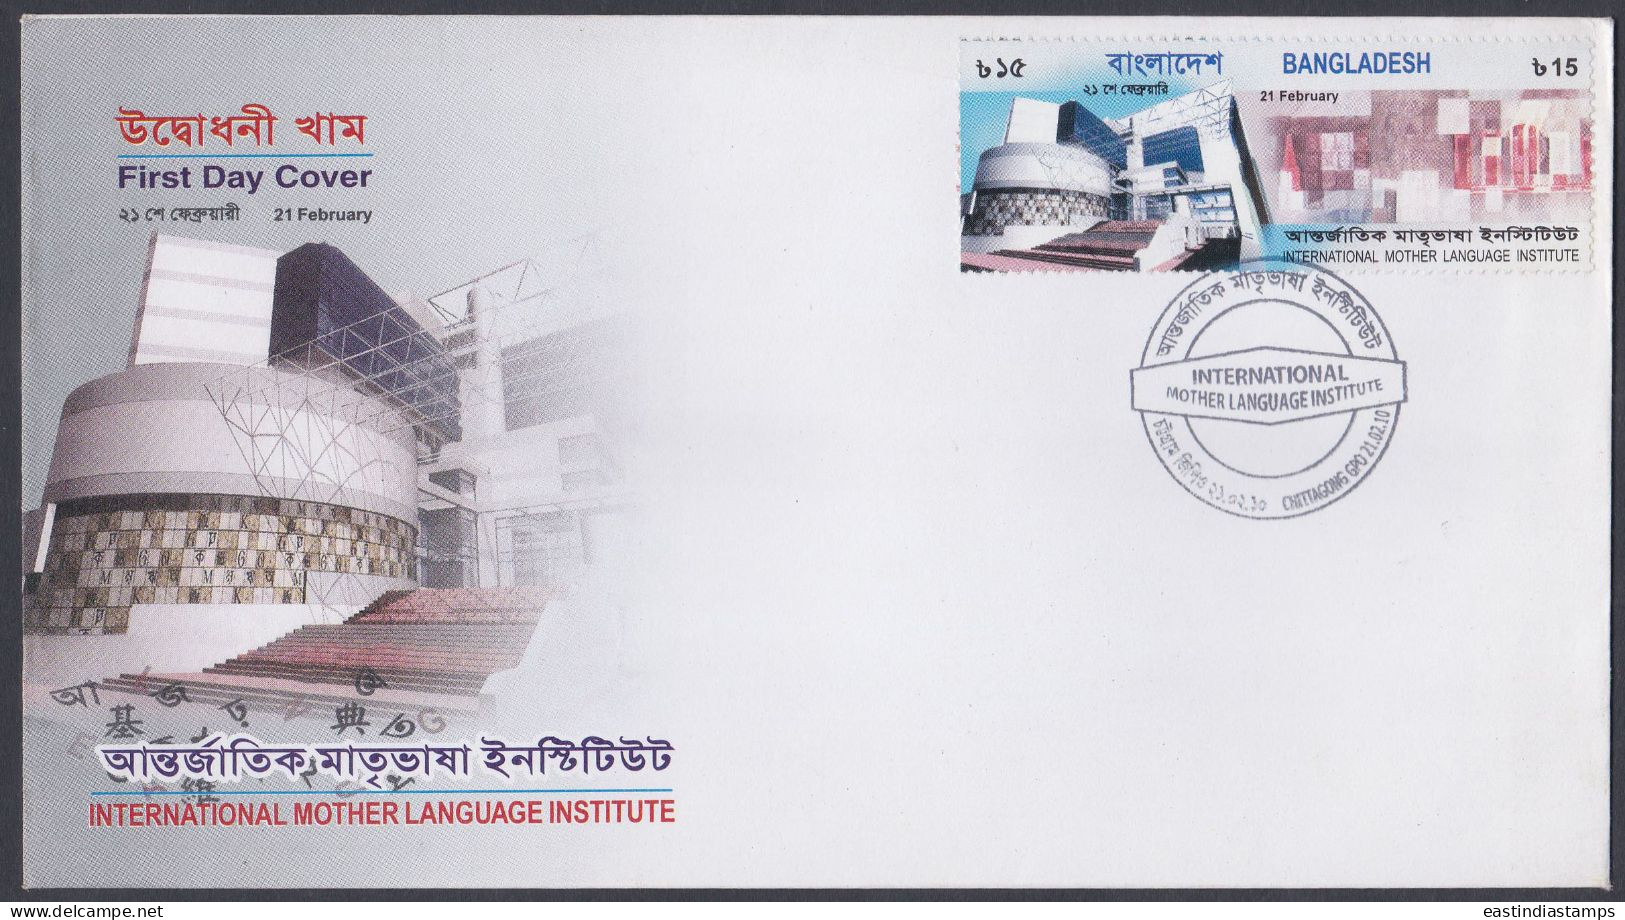 Bangladesh 2010 FDC International Mother Language Institute, First Day Cover - Bangladesh